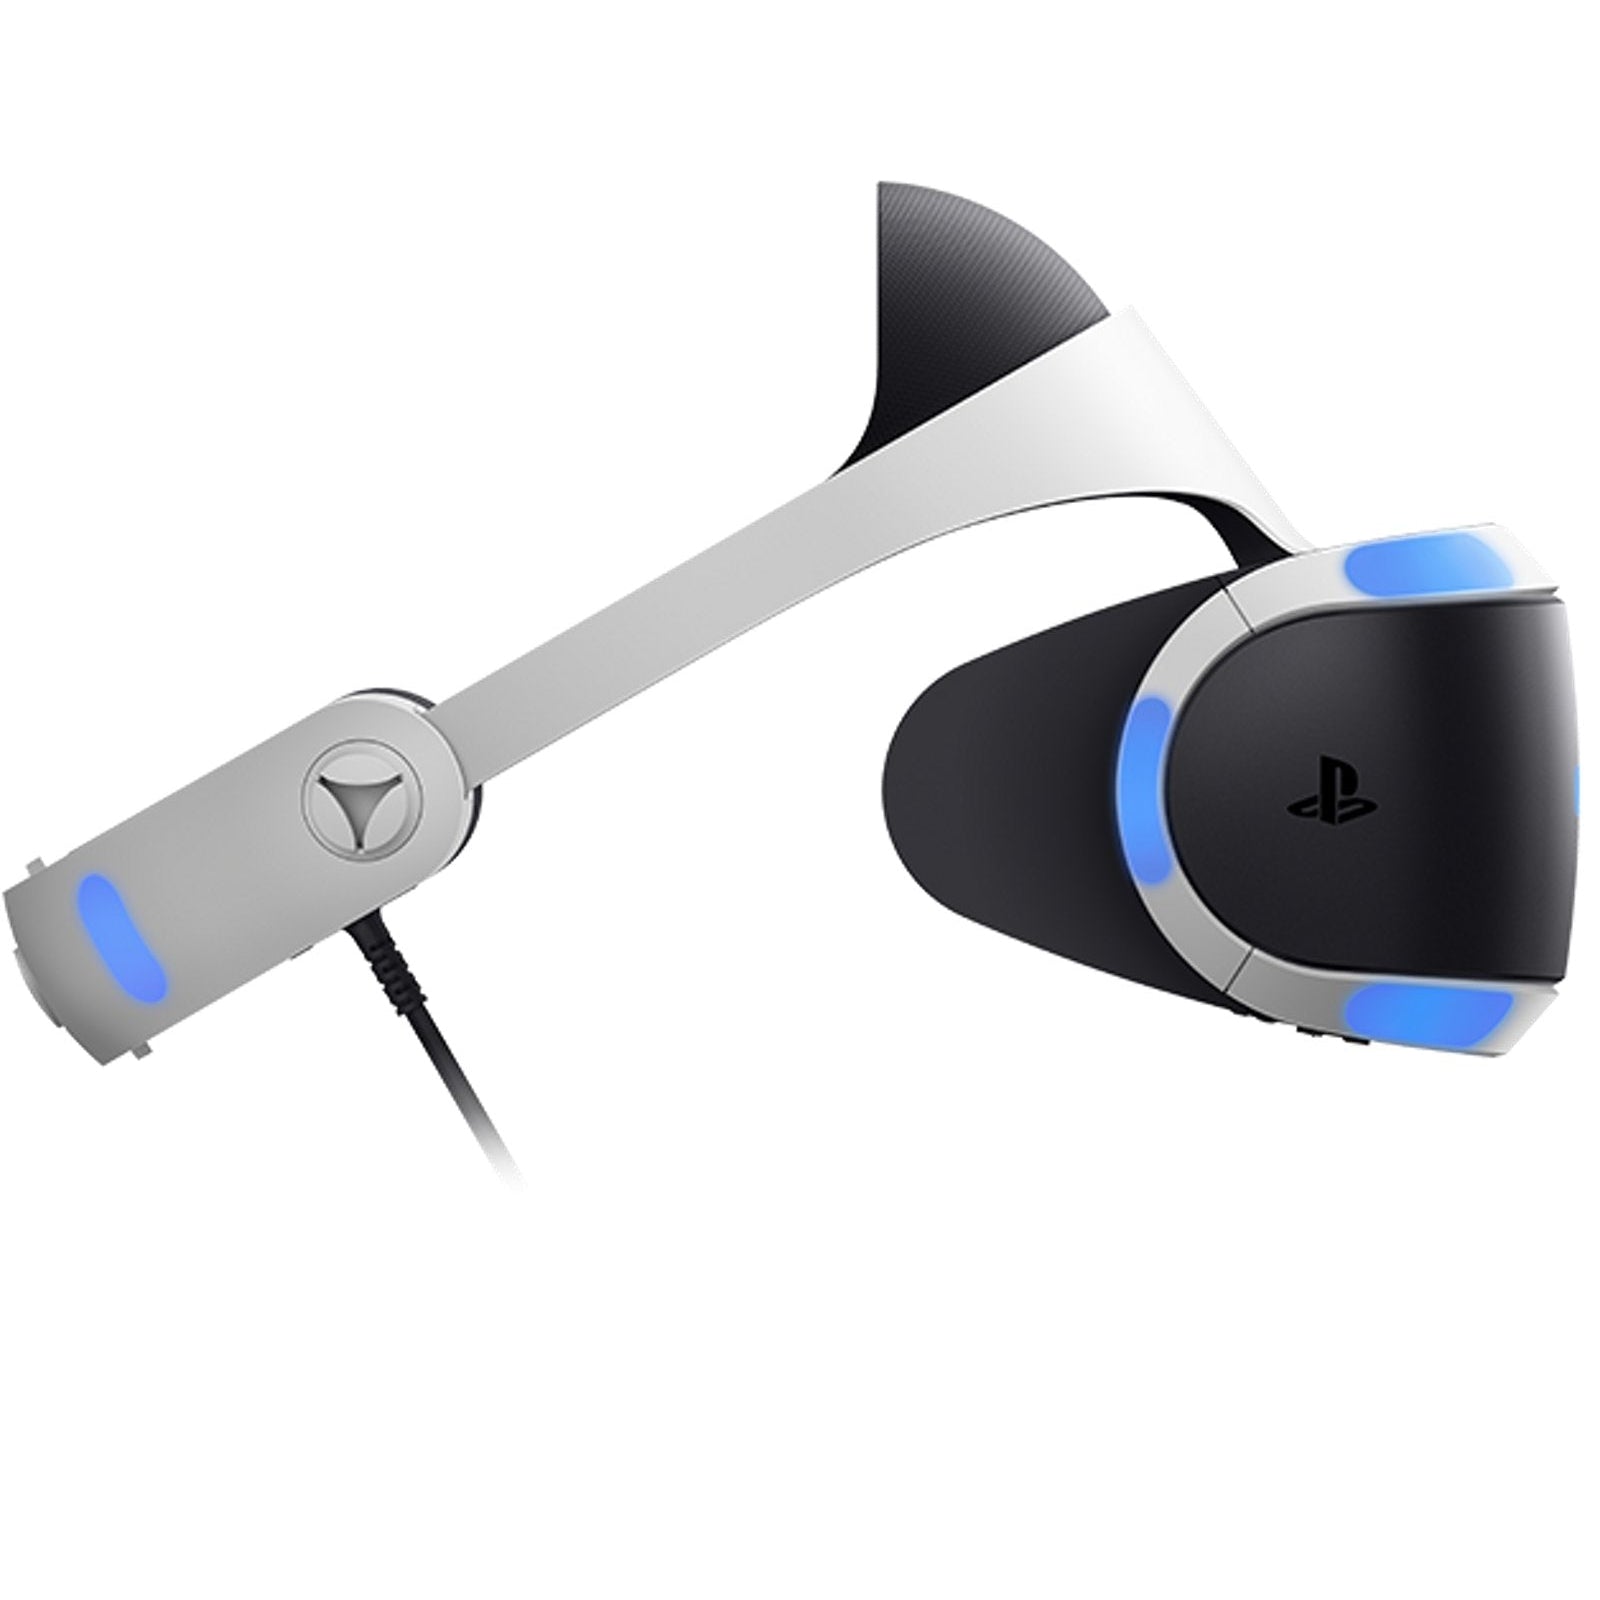 Sony PlayStation VR Gaming System with PlayStation Camera